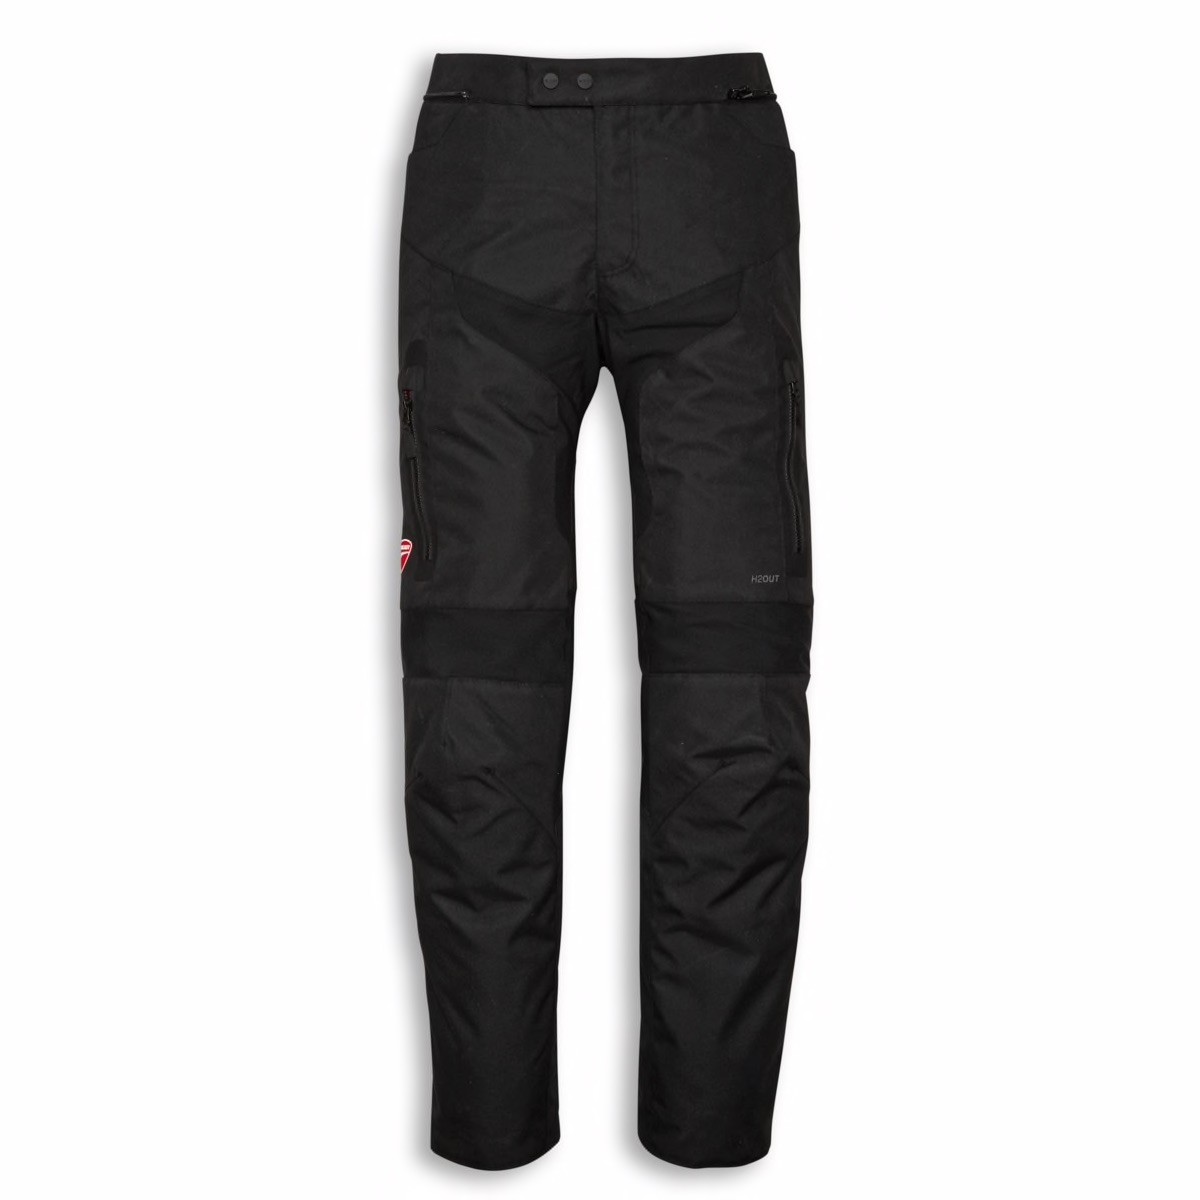 Tour C4 - Fabric trousers